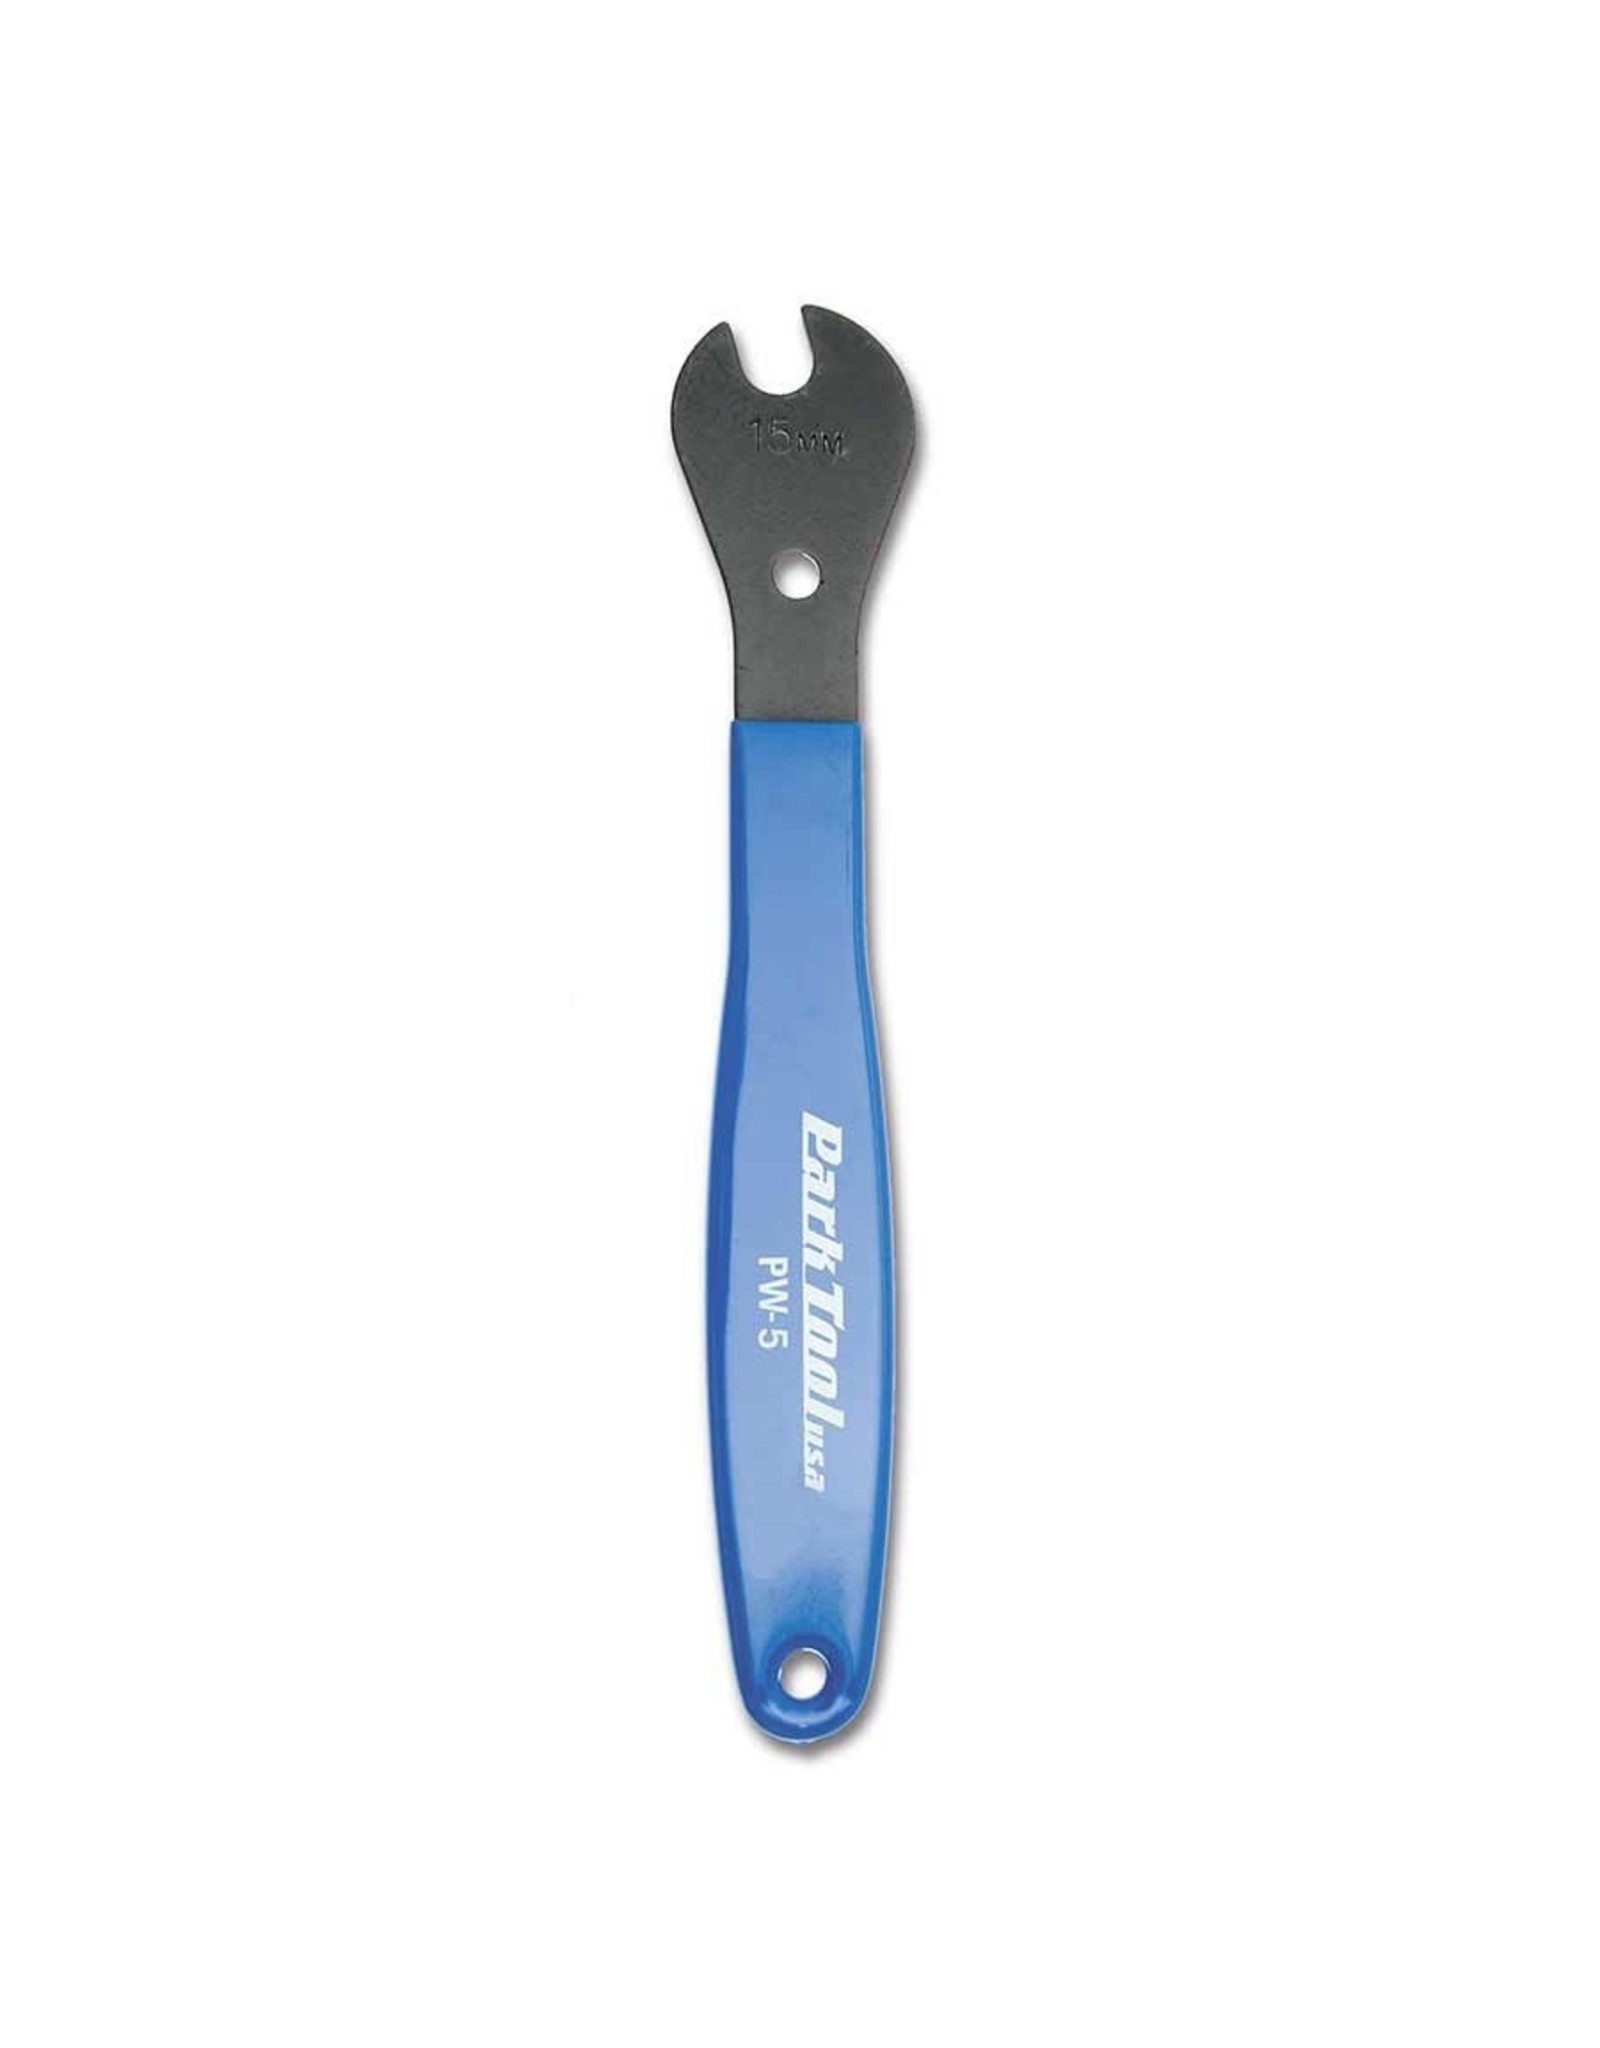 PARK TOOL Park Tool PW-5 Light Duty Pedal Wrench